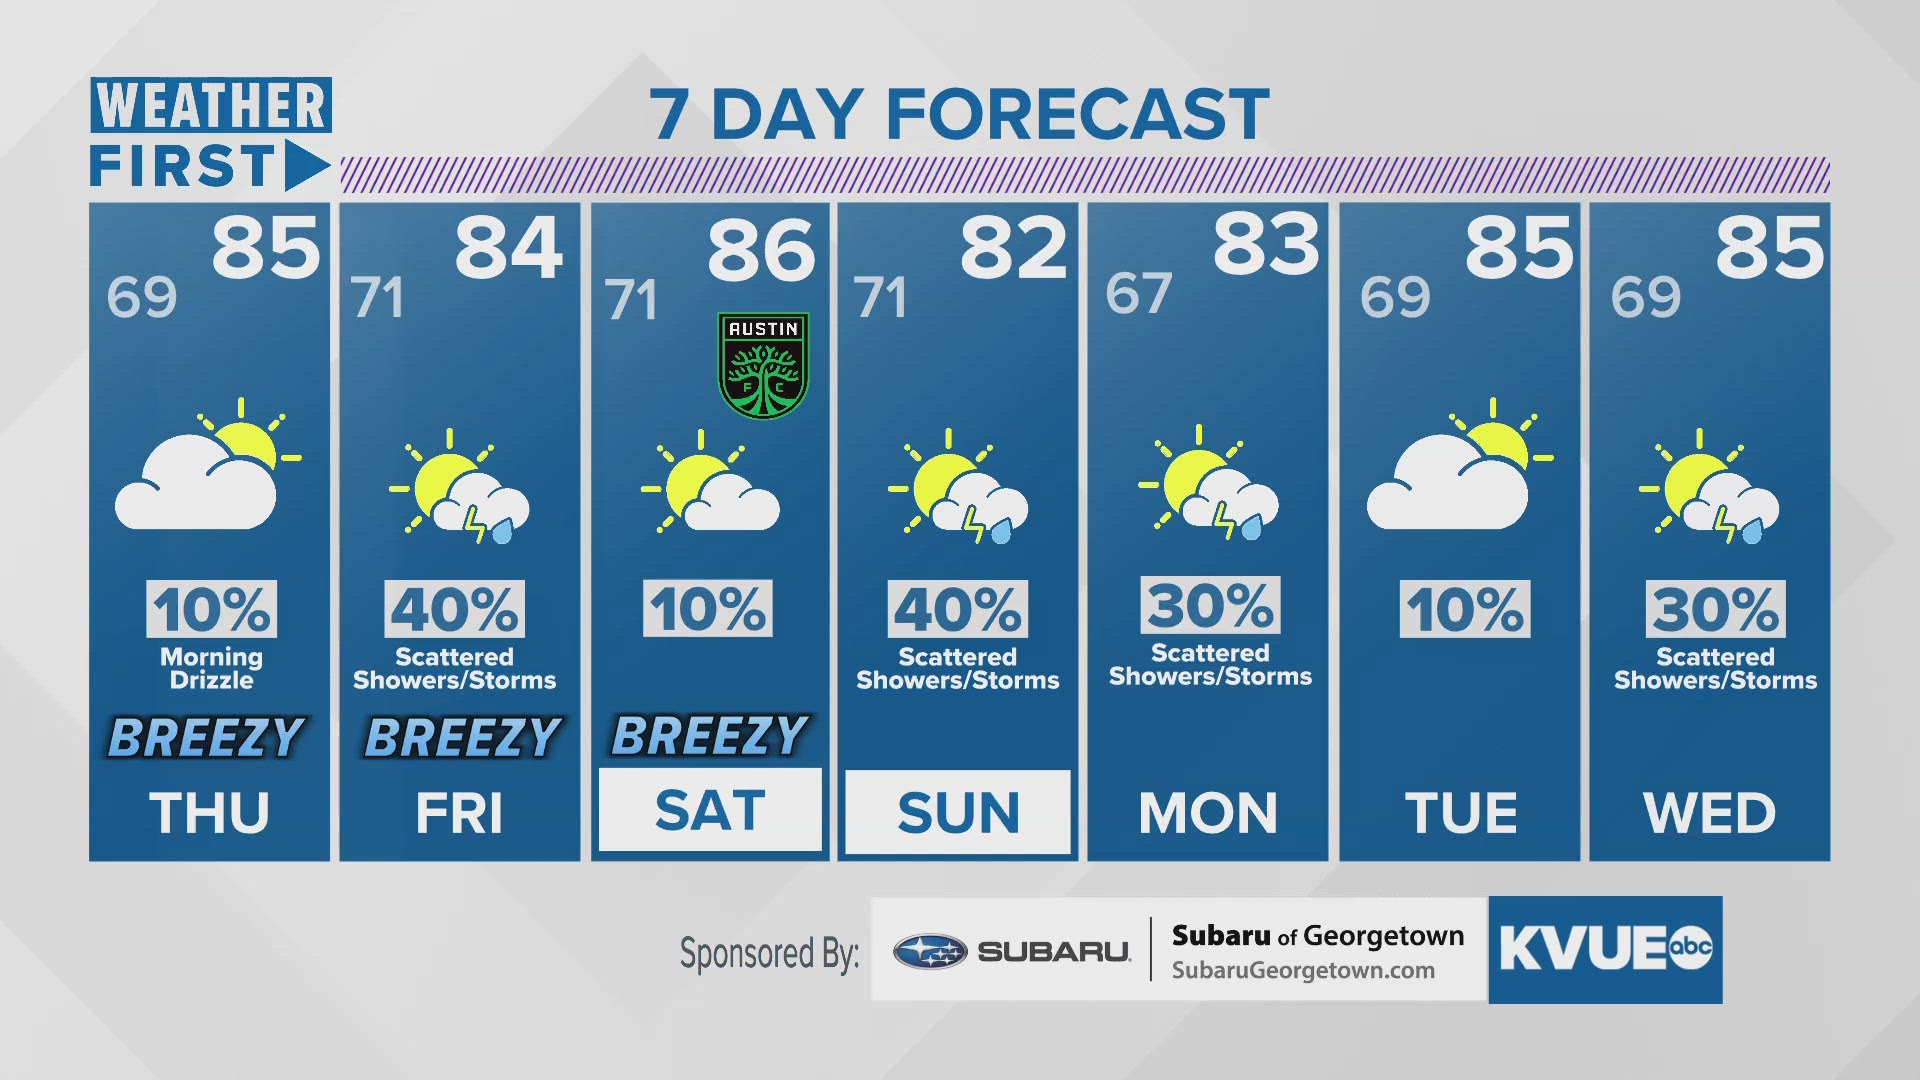 Scattered storms possible Friday and Sunday